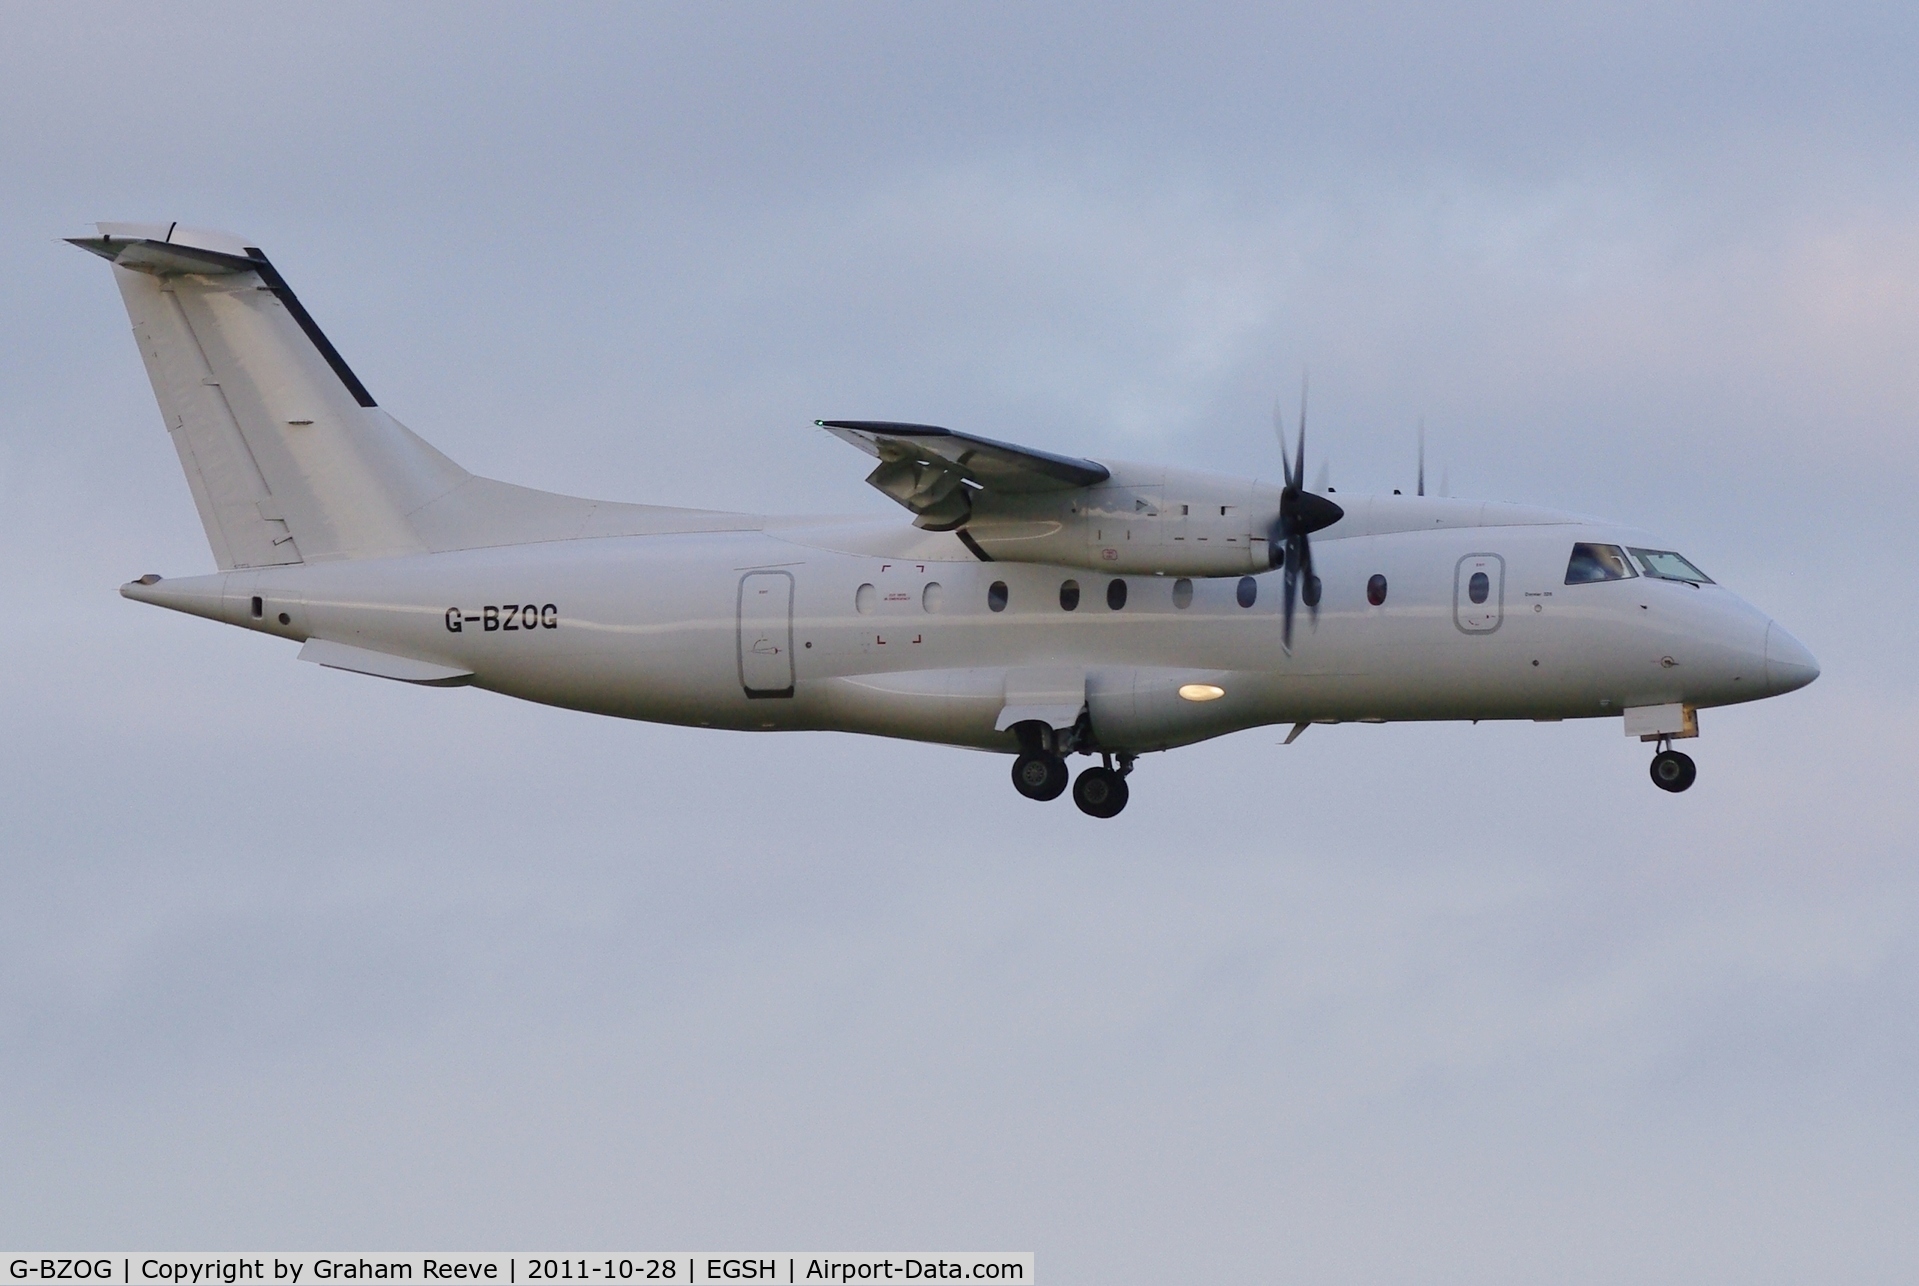 G-BZOG, 1998 Dornier 328-100 C/N 3088, about to touch down.